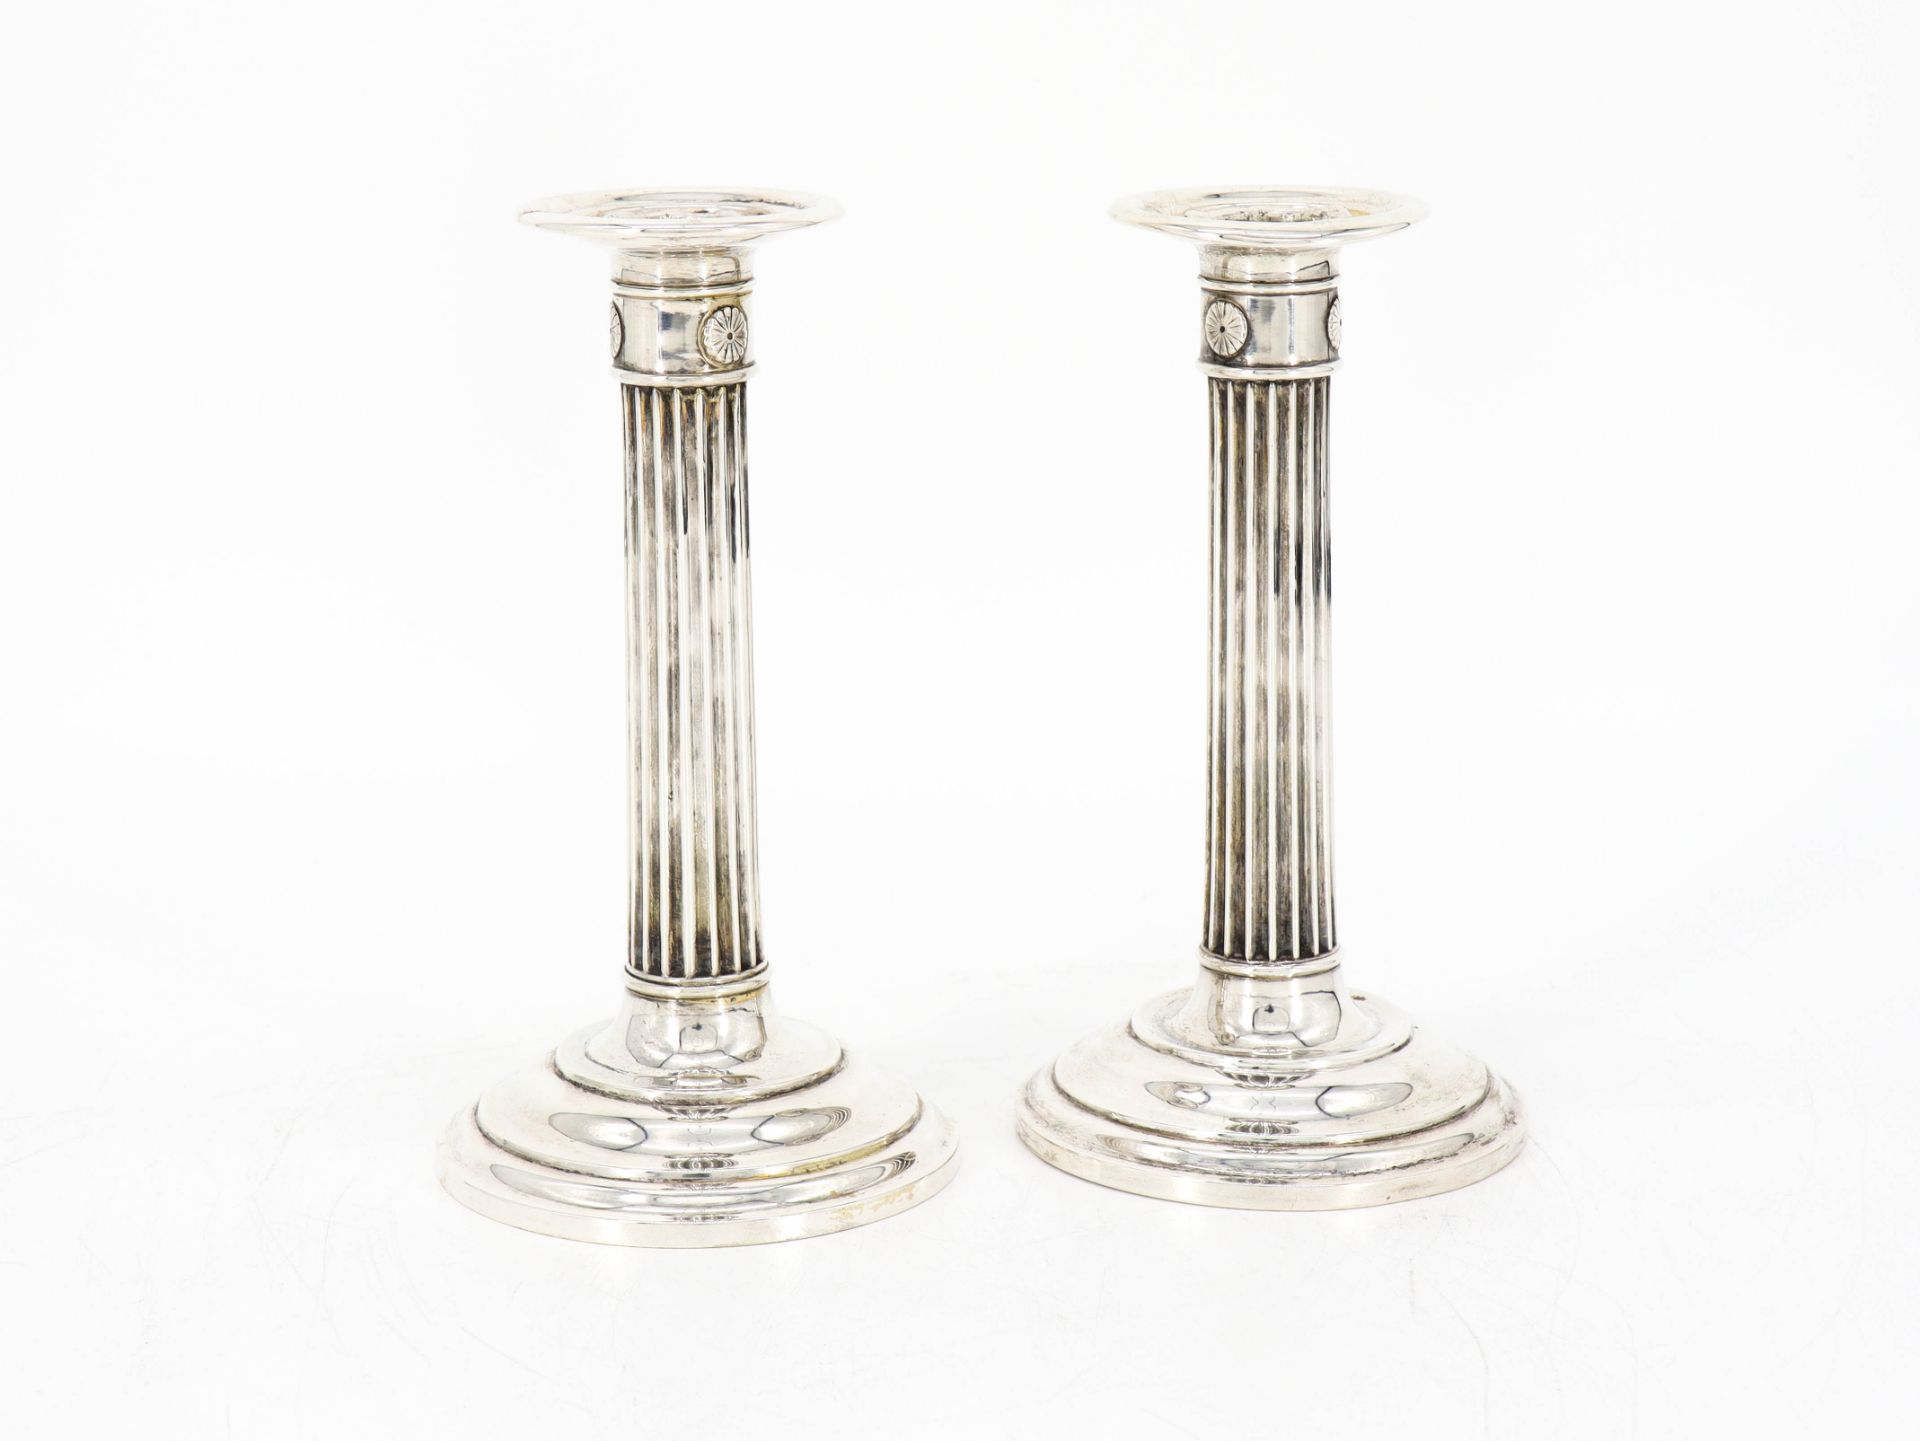 Pair of Neo-Classical Table Chandeliers, 925 sterling silver, Birmingham circa 1920. - Image 6 of 6